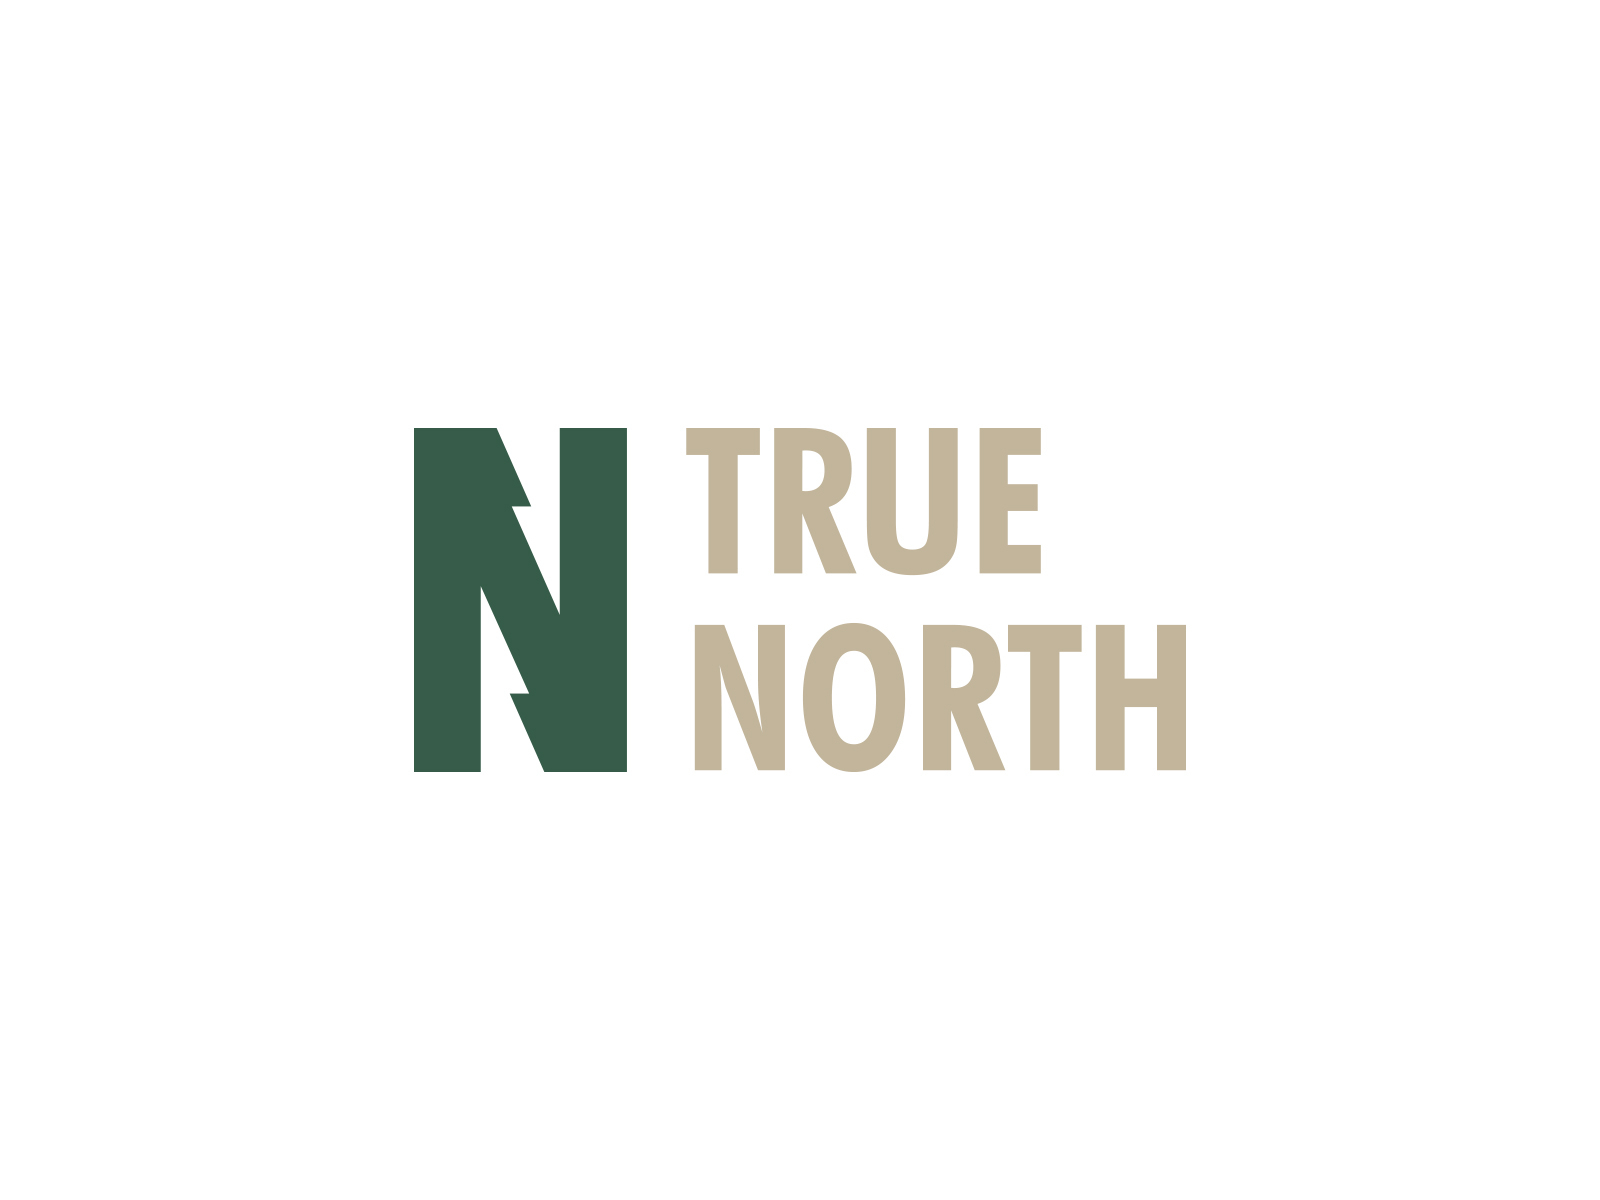 True North by Henry Postons on Dribbble